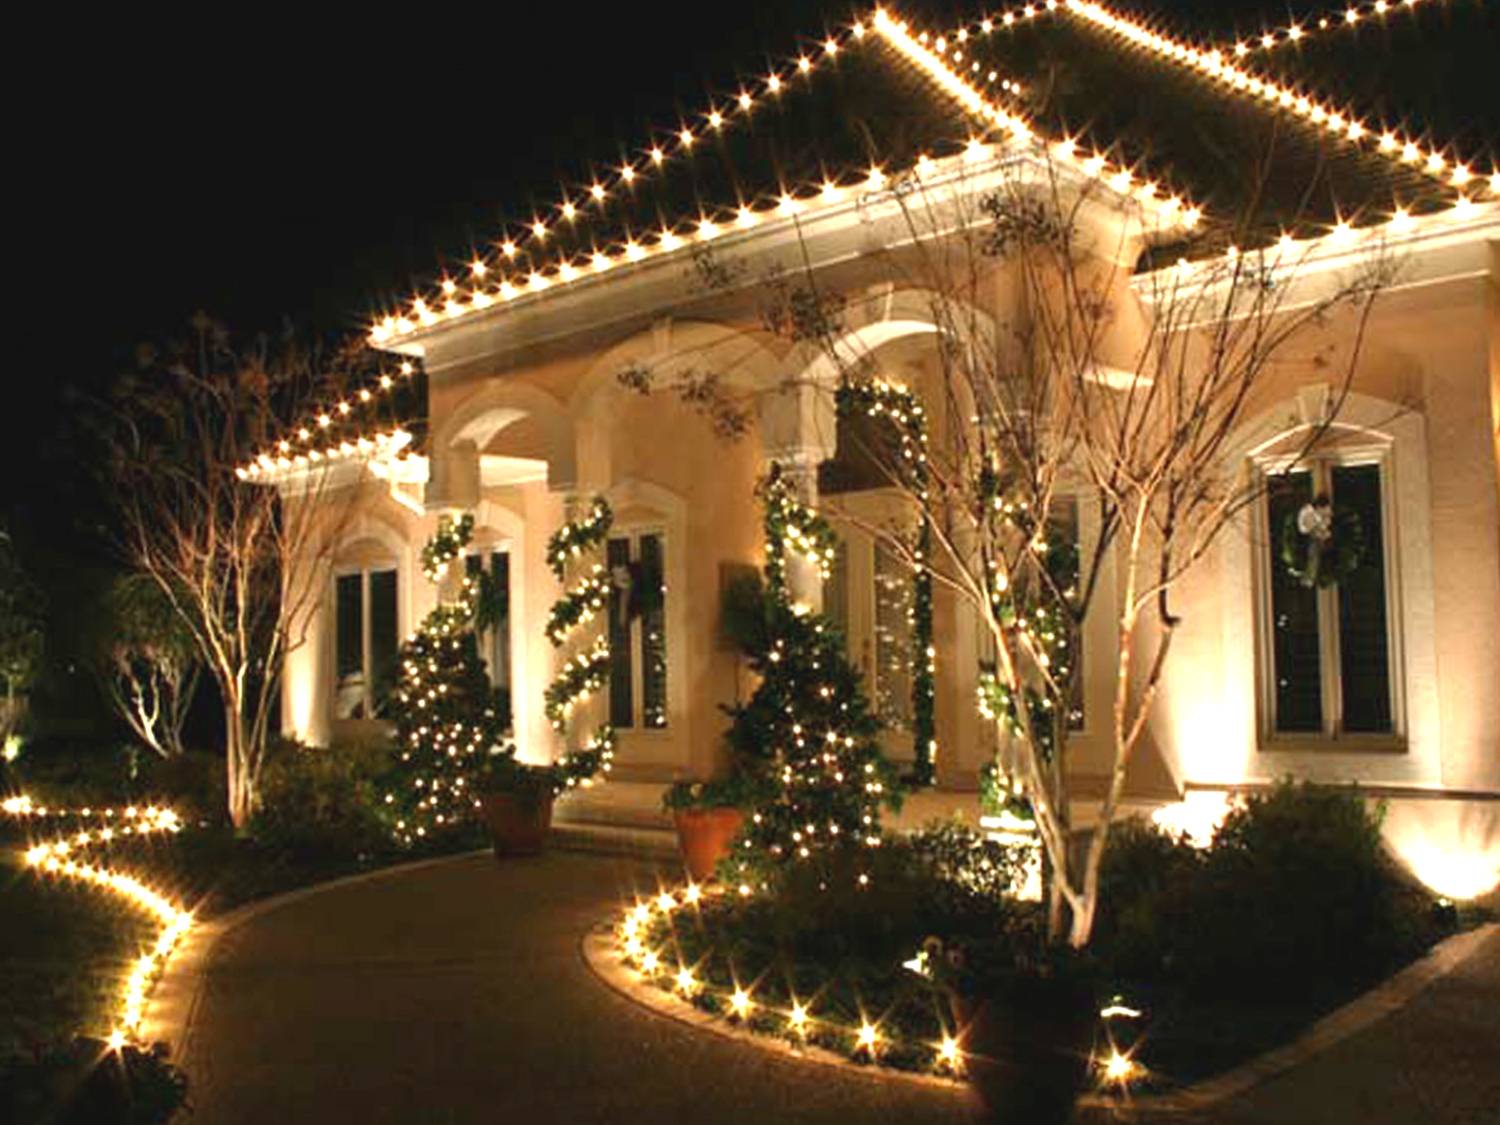 Front Door Featured Captivating Front Door Decorating Idea Featured Greenery Garland Wrapped Pillars And Cool Exterior Light Fixtures Outdoor Magnificent Lighting Fixture For A Wonderful Outdoor Design